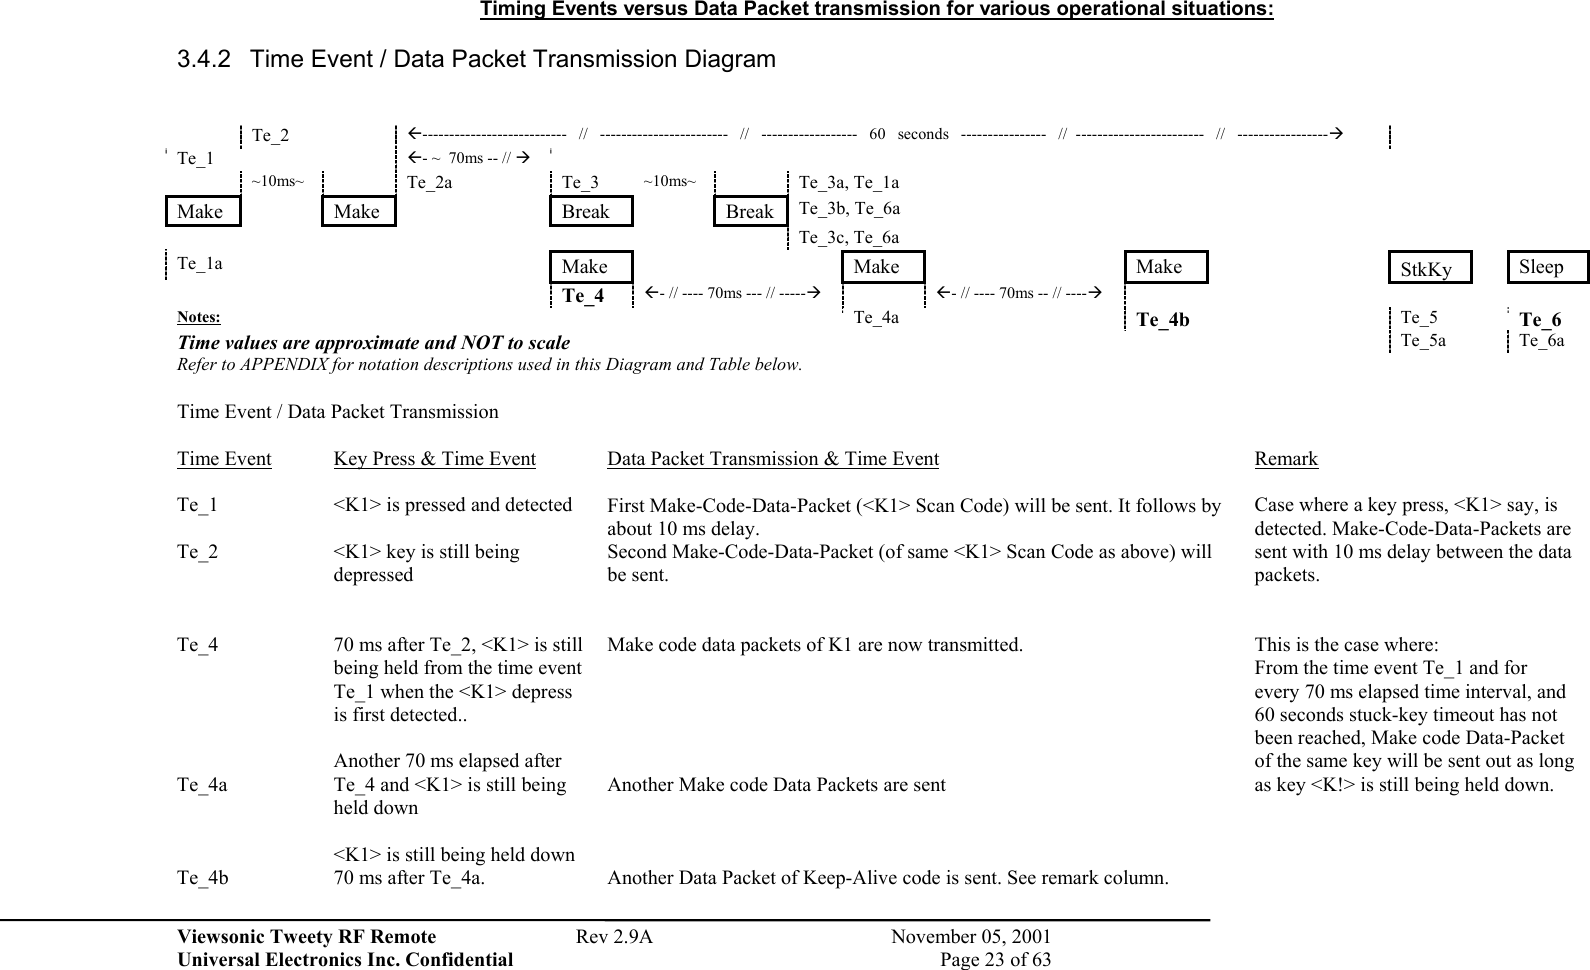 Viewsonic Tweety RF Remote  Rev 2.9A  November 05, 2001 Universal Electronics Inc. Confidential    Page 23 of 63   Timing Events versus Data Packet transmission for various operational situations: 3.4.2  Time Event / Data Packet Transmission Diagram                       Te_2  ---------------------------   //   ------------------------   //   ------------------   60   seconds   ----------------   //  ------------------------   //   -----------------    Te_1    - ~  70ms -- //               ~10ms~   Te_2a Te_3 ~10ms~  Te_3a, Te_1a          Make    Make    Break    Break  Te_3b, Te_6a                Te_3c, Te_6a       Te_1a      Make      Make     Make    StkKy    Sleep       Te_4  - // ---- 70ms --- // -----  - // ---- 70ms -- // ----       Notes:         Te_4a   Te_4b   Te_5   Te_6 Time values are approximate and NOT to scale            Te_5a  Te_6a Refer to APPENDIX for notation descriptions used in this Diagram and Table below.           Time Event / Data Packet Transmission  Time Event  Key Press &amp; Time Event  Data Packet Transmission &amp; Time Event Remark  Te_1  &lt;K1&gt; is pressed and detected   First Make-Code-Data-Packet (&lt;K1&gt; Scan Code) will be sent. It follows by about 10 ms delay. Te_2  &lt;K1&gt; key is still being depressed  Second Make-Code-Data-Packet (of same &lt;K1&gt; Scan Code as above) will be sent.  Case where a key press, &lt;K1&gt; say, is detected. Make-Code-Data-Packets are sent with 10 ms delay between the data packets.  Te_4      Te_4a    Te_4b   70 ms after Te_2, &lt;K1&gt; is still being held from the time event Te_1 when the &lt;K1&gt; depress is first detected..  Another 70 ms elapsed after Te_4 and &lt;K1&gt; is still being held down   &lt;K1&gt; is still being held down 70 ms after Te_4a.   Make code data packets of K1 are now transmitted.      Another Make code Data Packets are sent    Another Data Packet of Keep-Alive code is sent. See remark column.  This is the case where: From the time event Te_1 and for every 70 ms elapsed time interval, and 60 seconds stuck-key timeout has not been reached, Make code Data-Packet of the same key will be sent out as long as key &lt;K!&gt; is still being held down. 